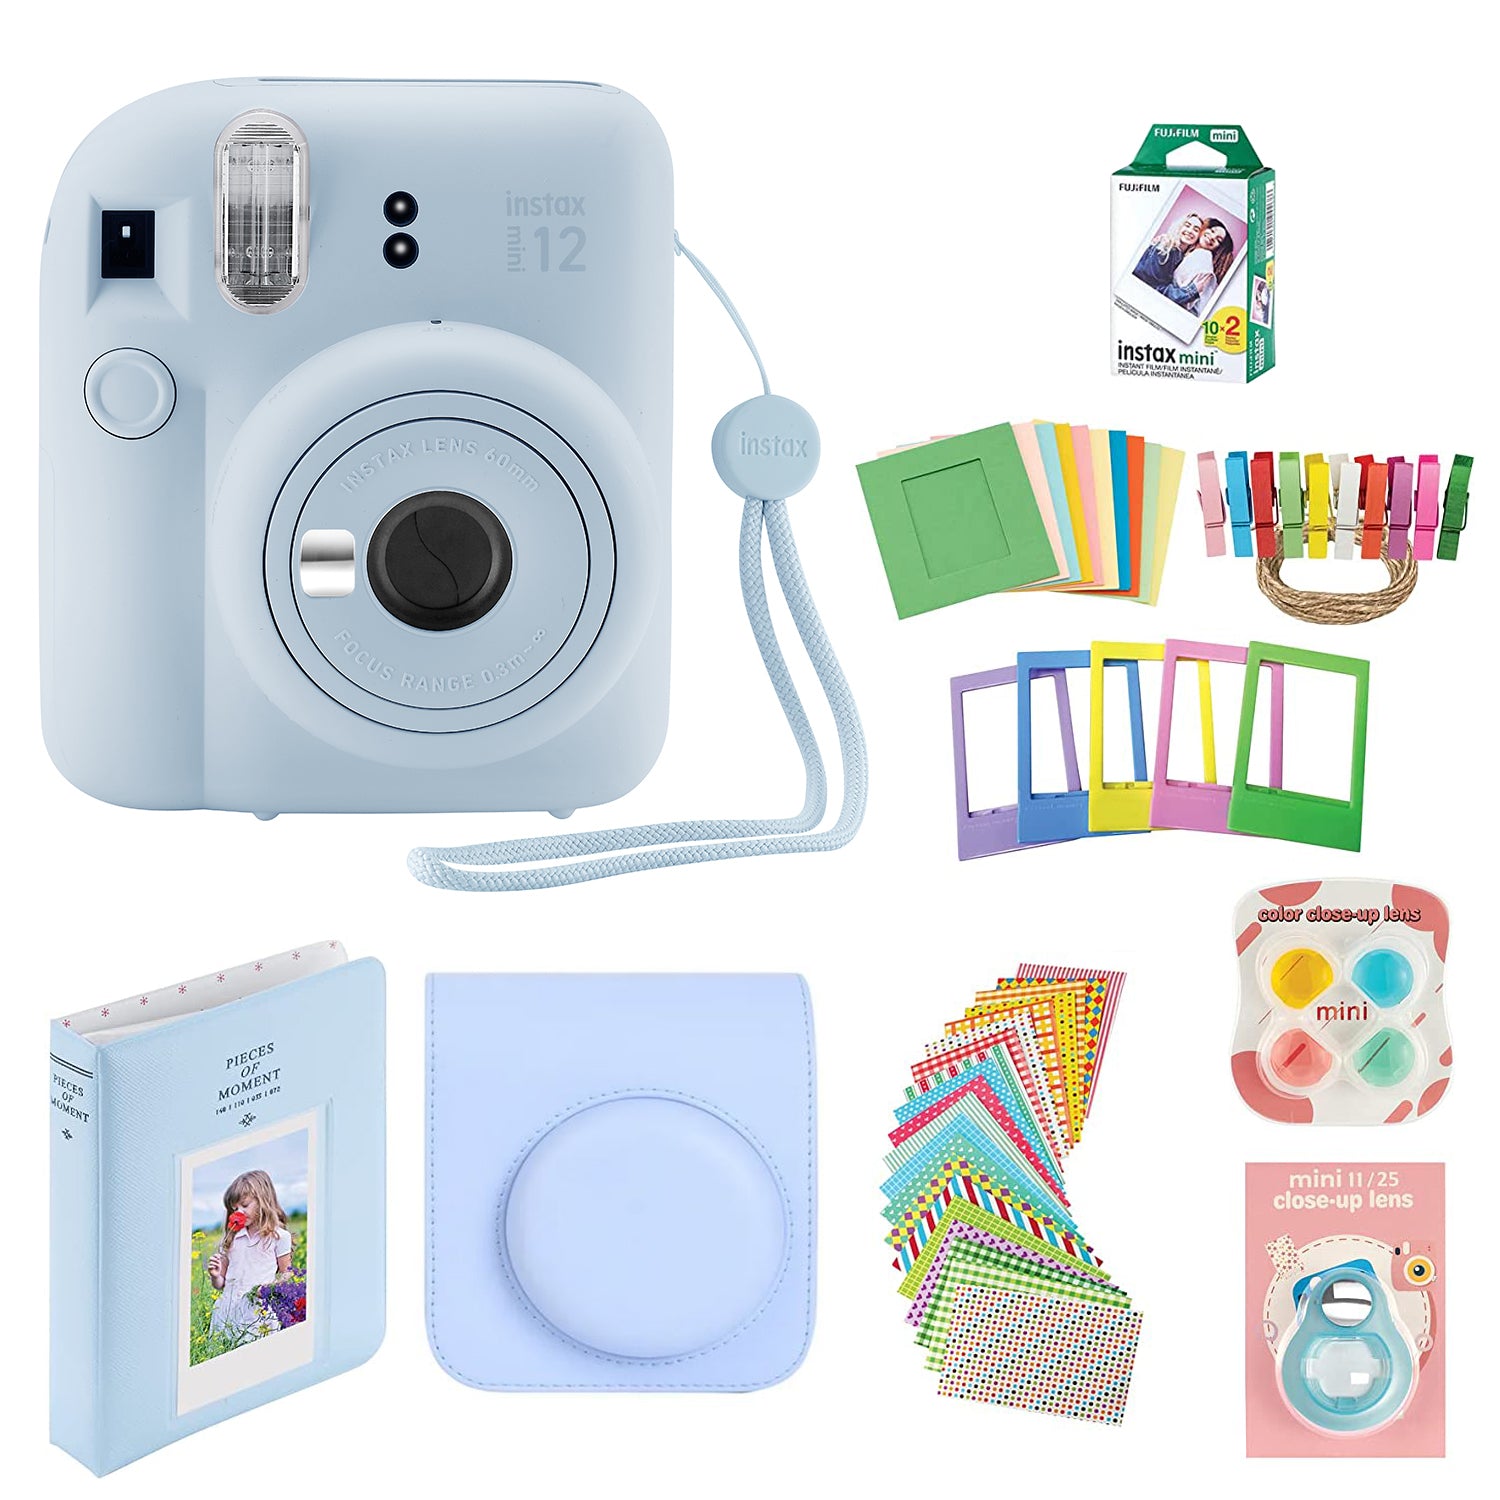 Fujifilm Instax Mini 12 Instant Camera with Case, 20 Fuji Films, Decoration Stickers, Frames, Photo Album and More Accessory kit (Pastel Blue)